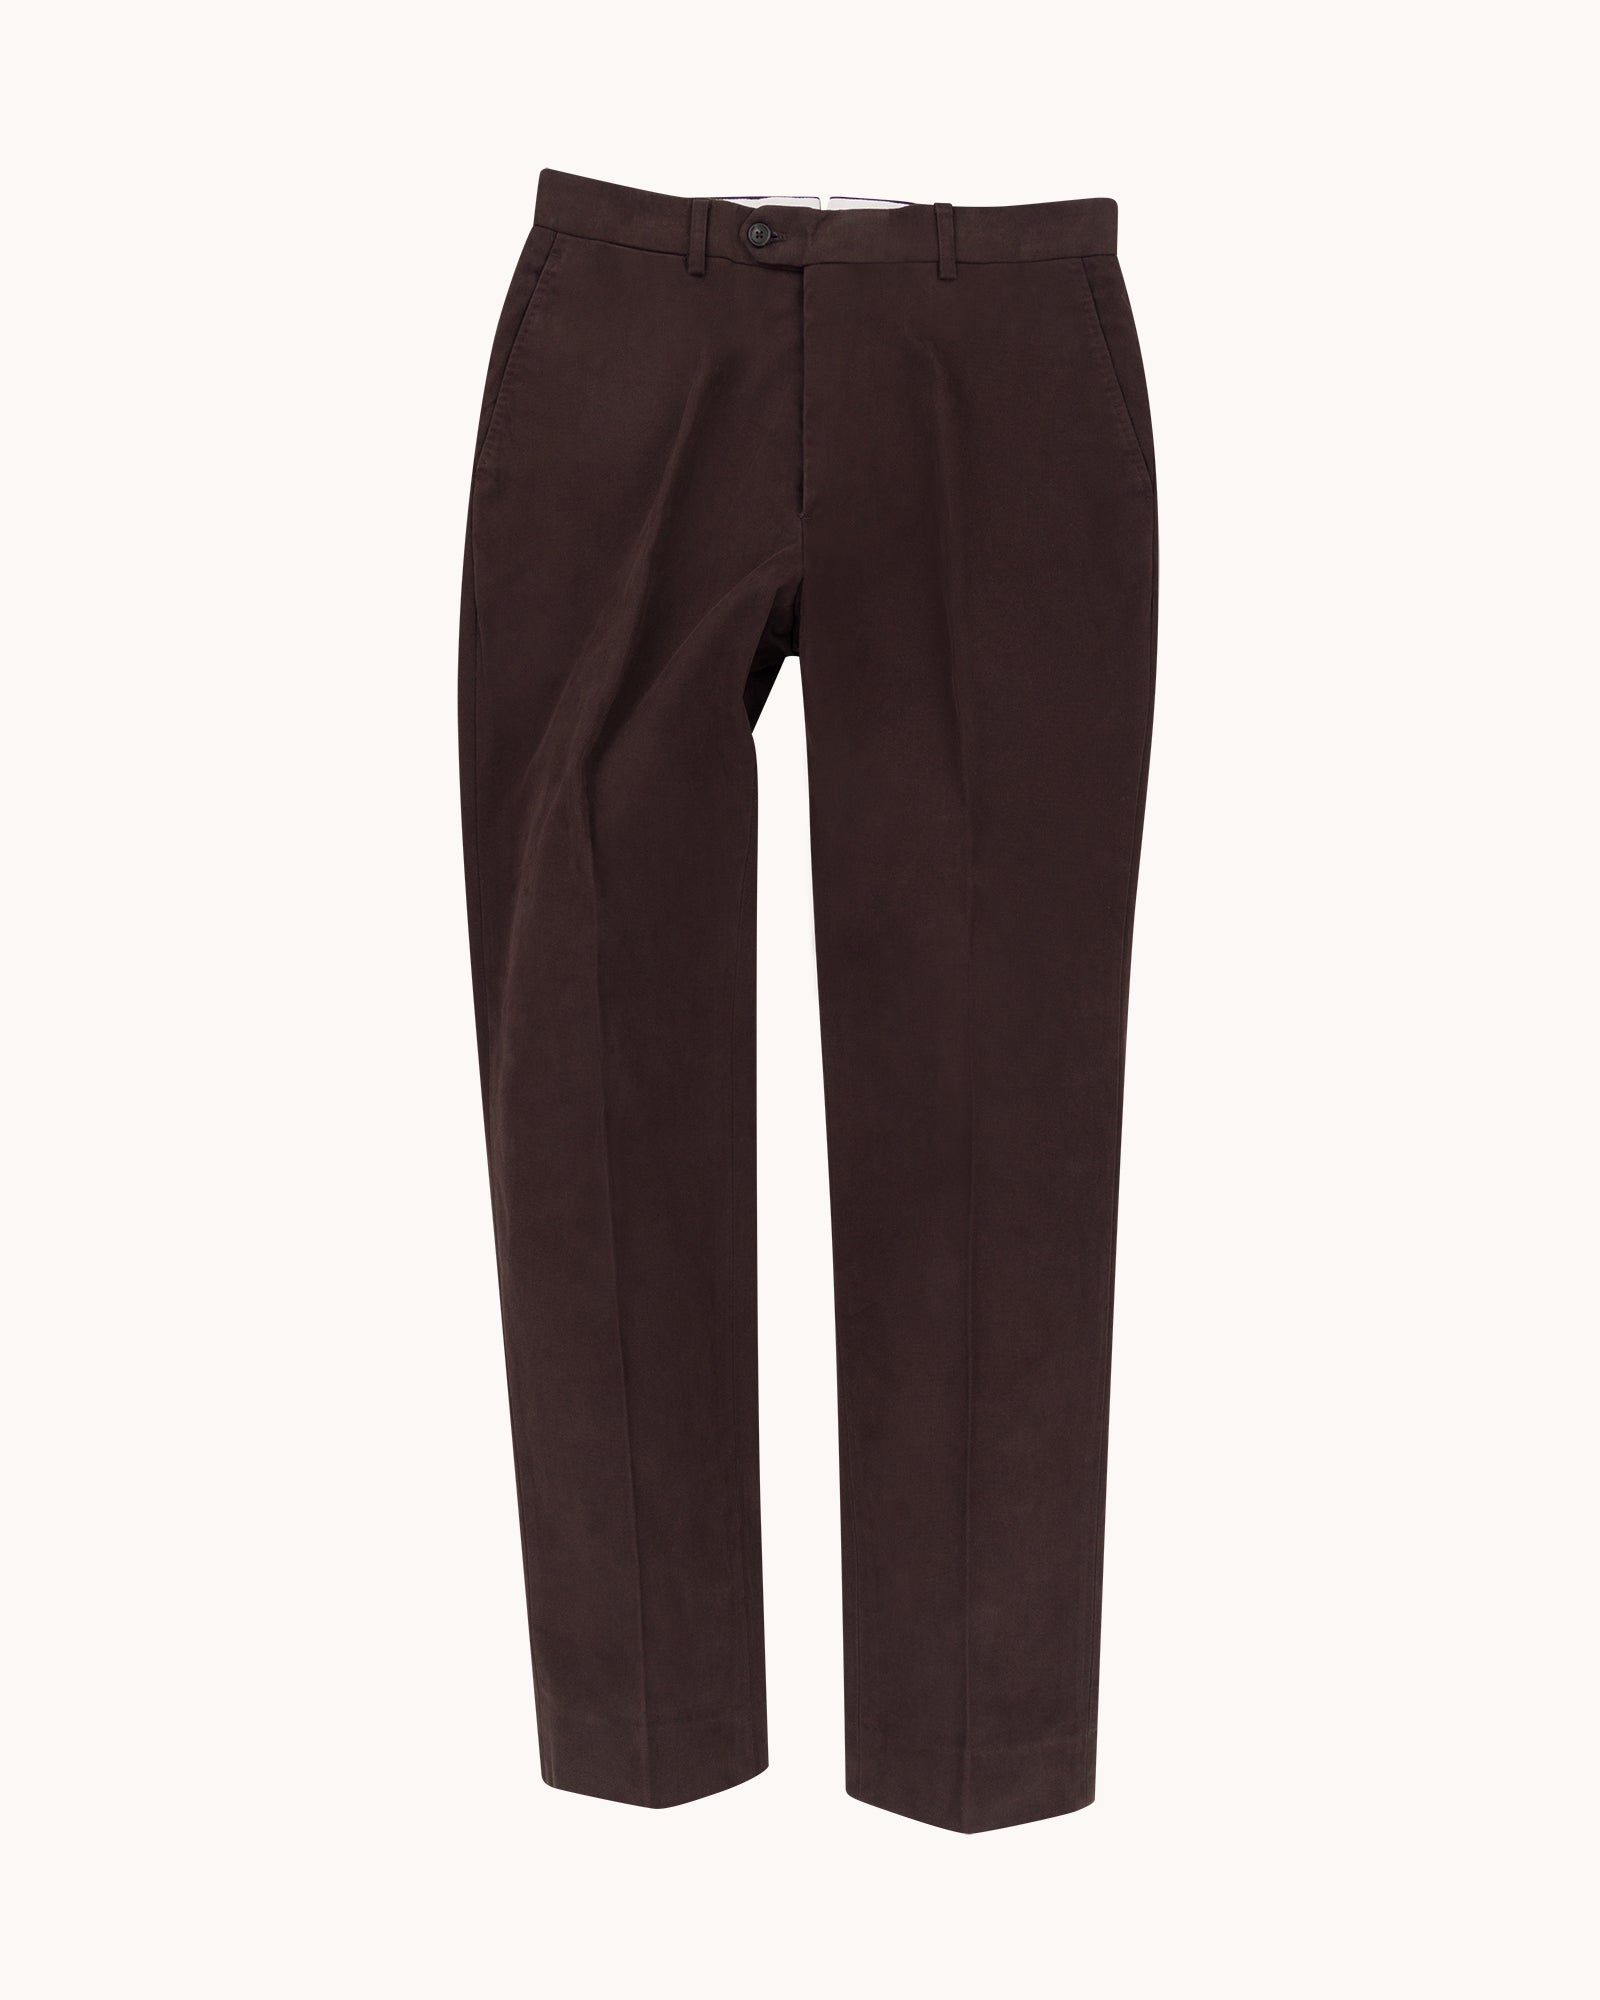 Garment Washed Flat Front Trouser - Brown Cotton Canvas